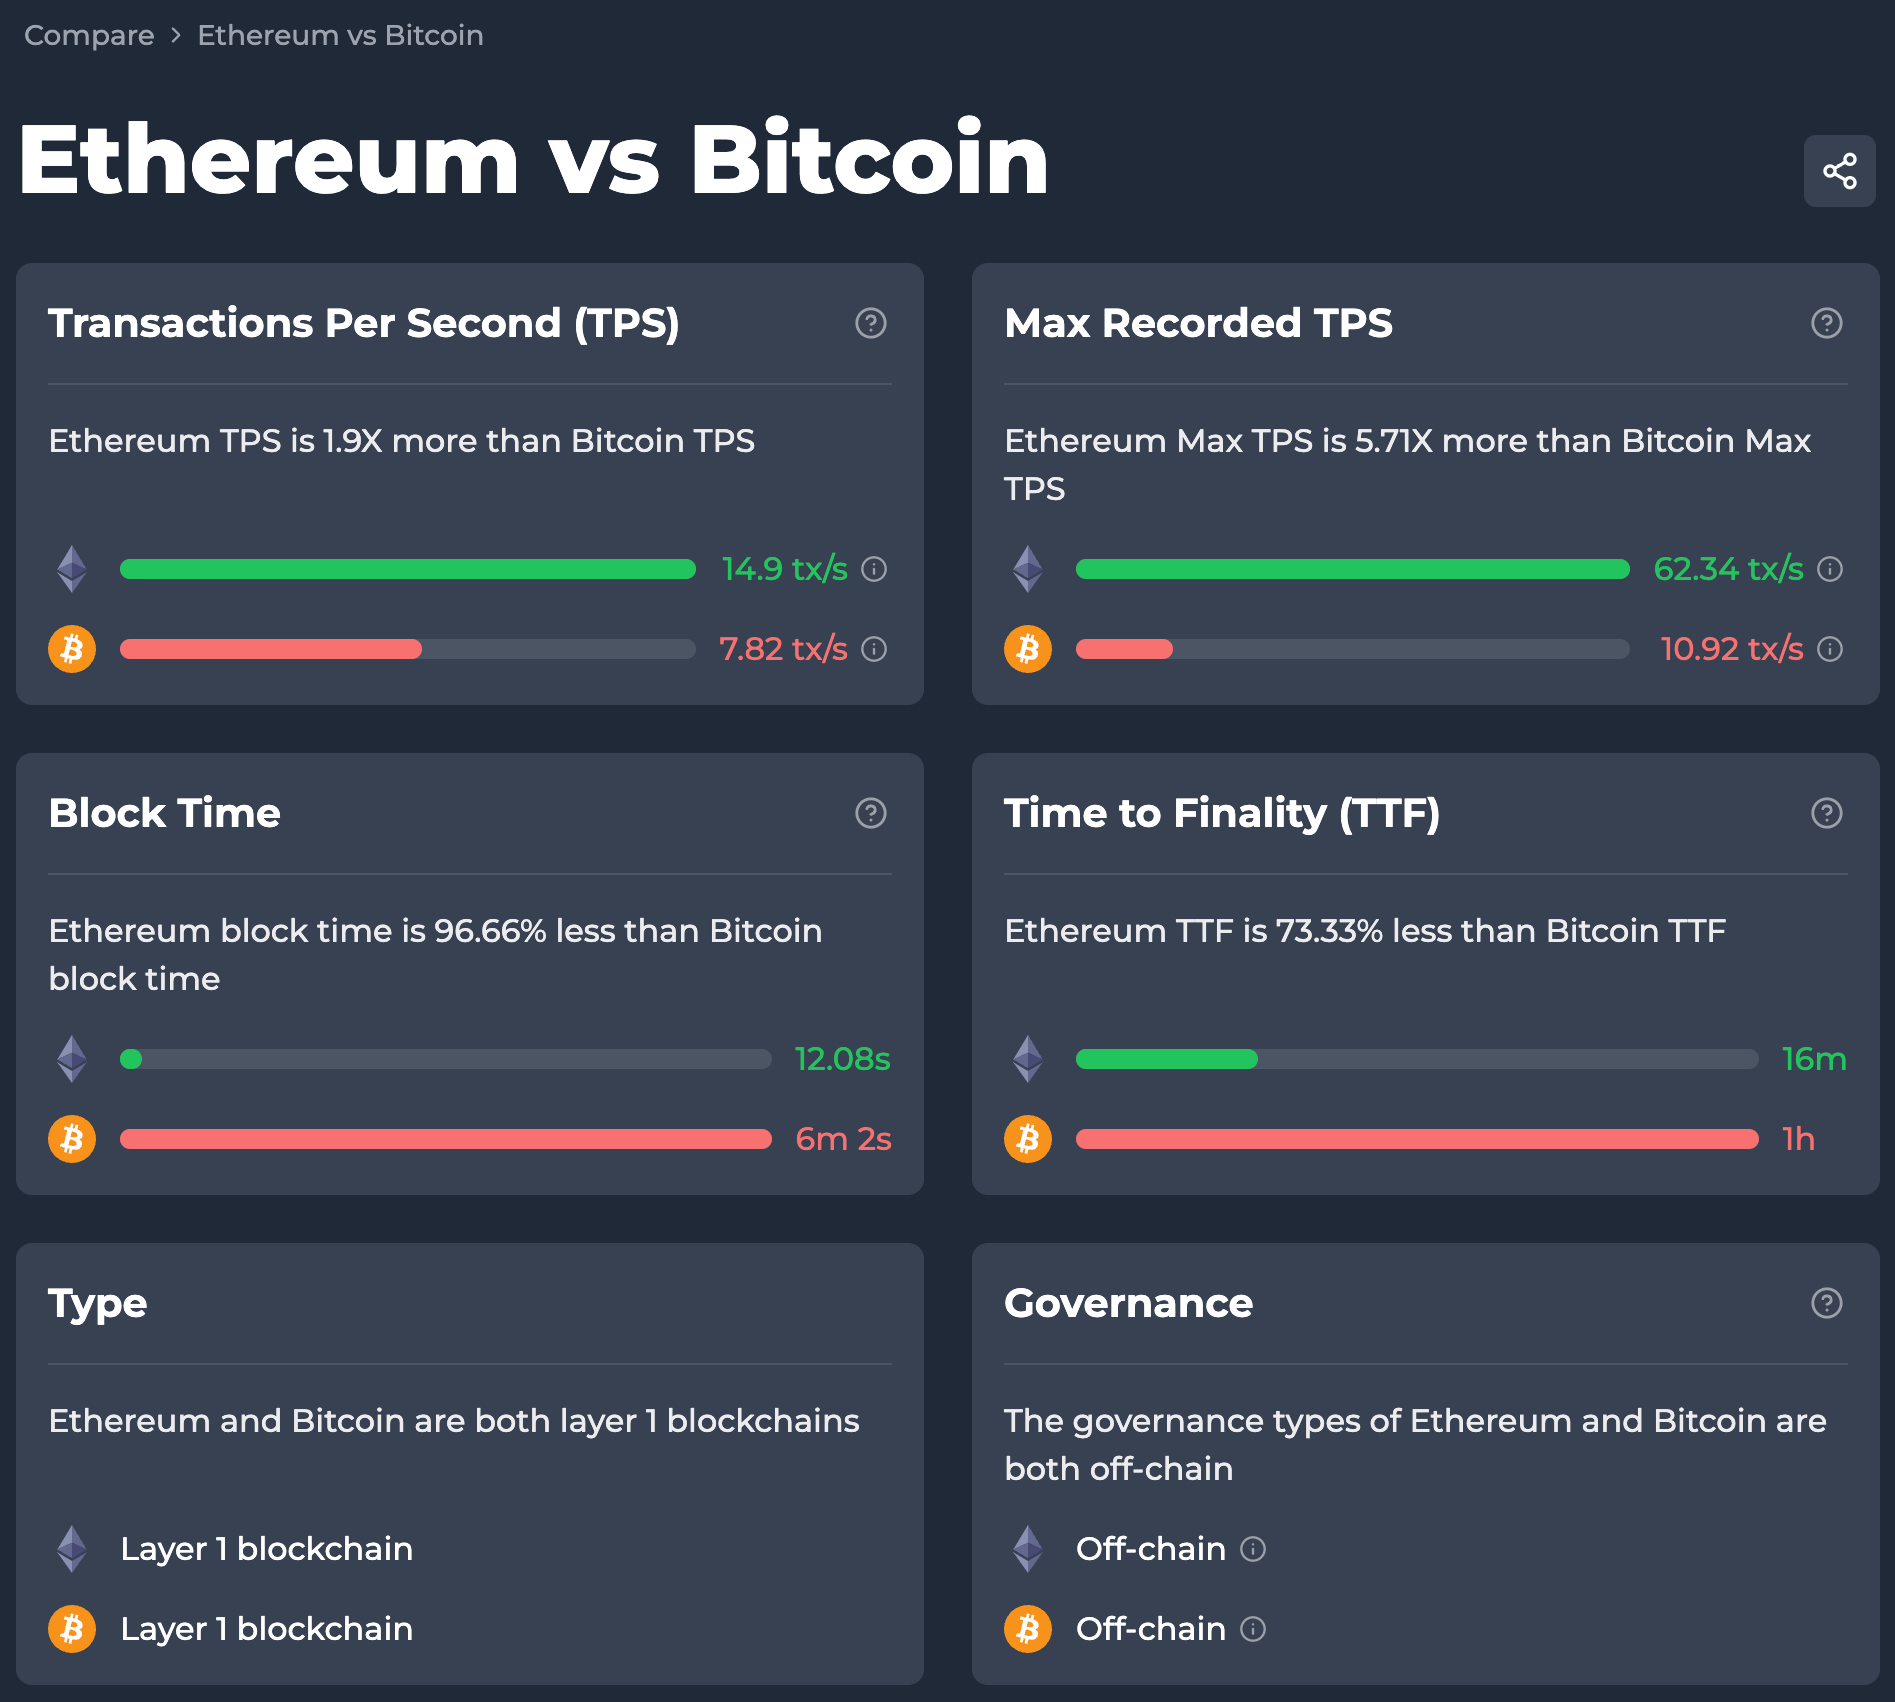 Ethereum vs Bitcoin page